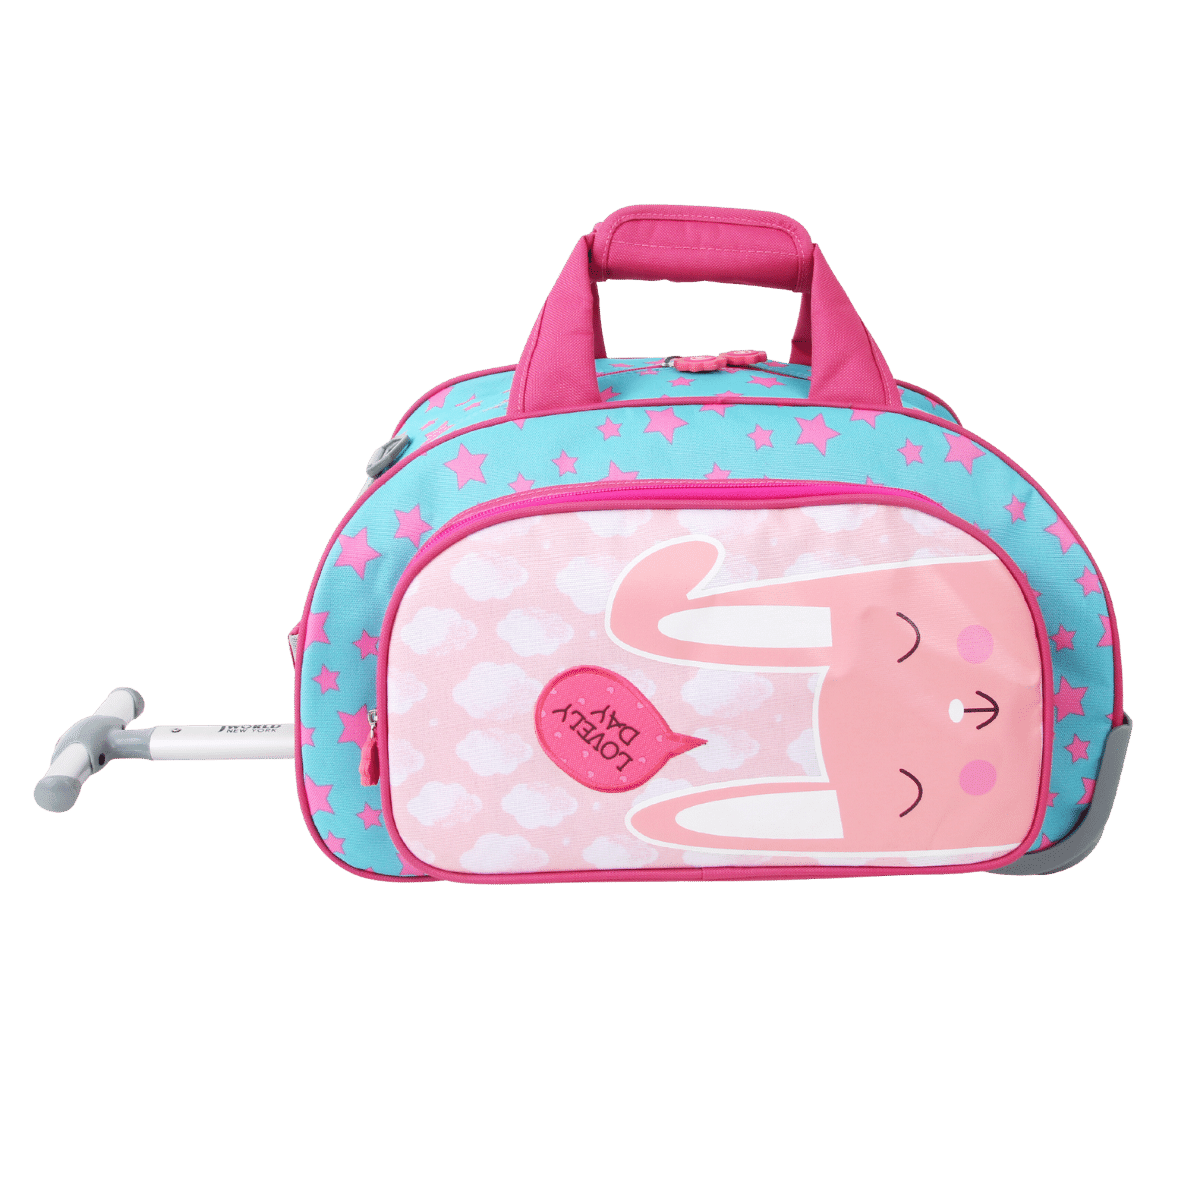 Ready, Set, Go! - Kids' Duffle Bags for Active Kids - JWorldstore